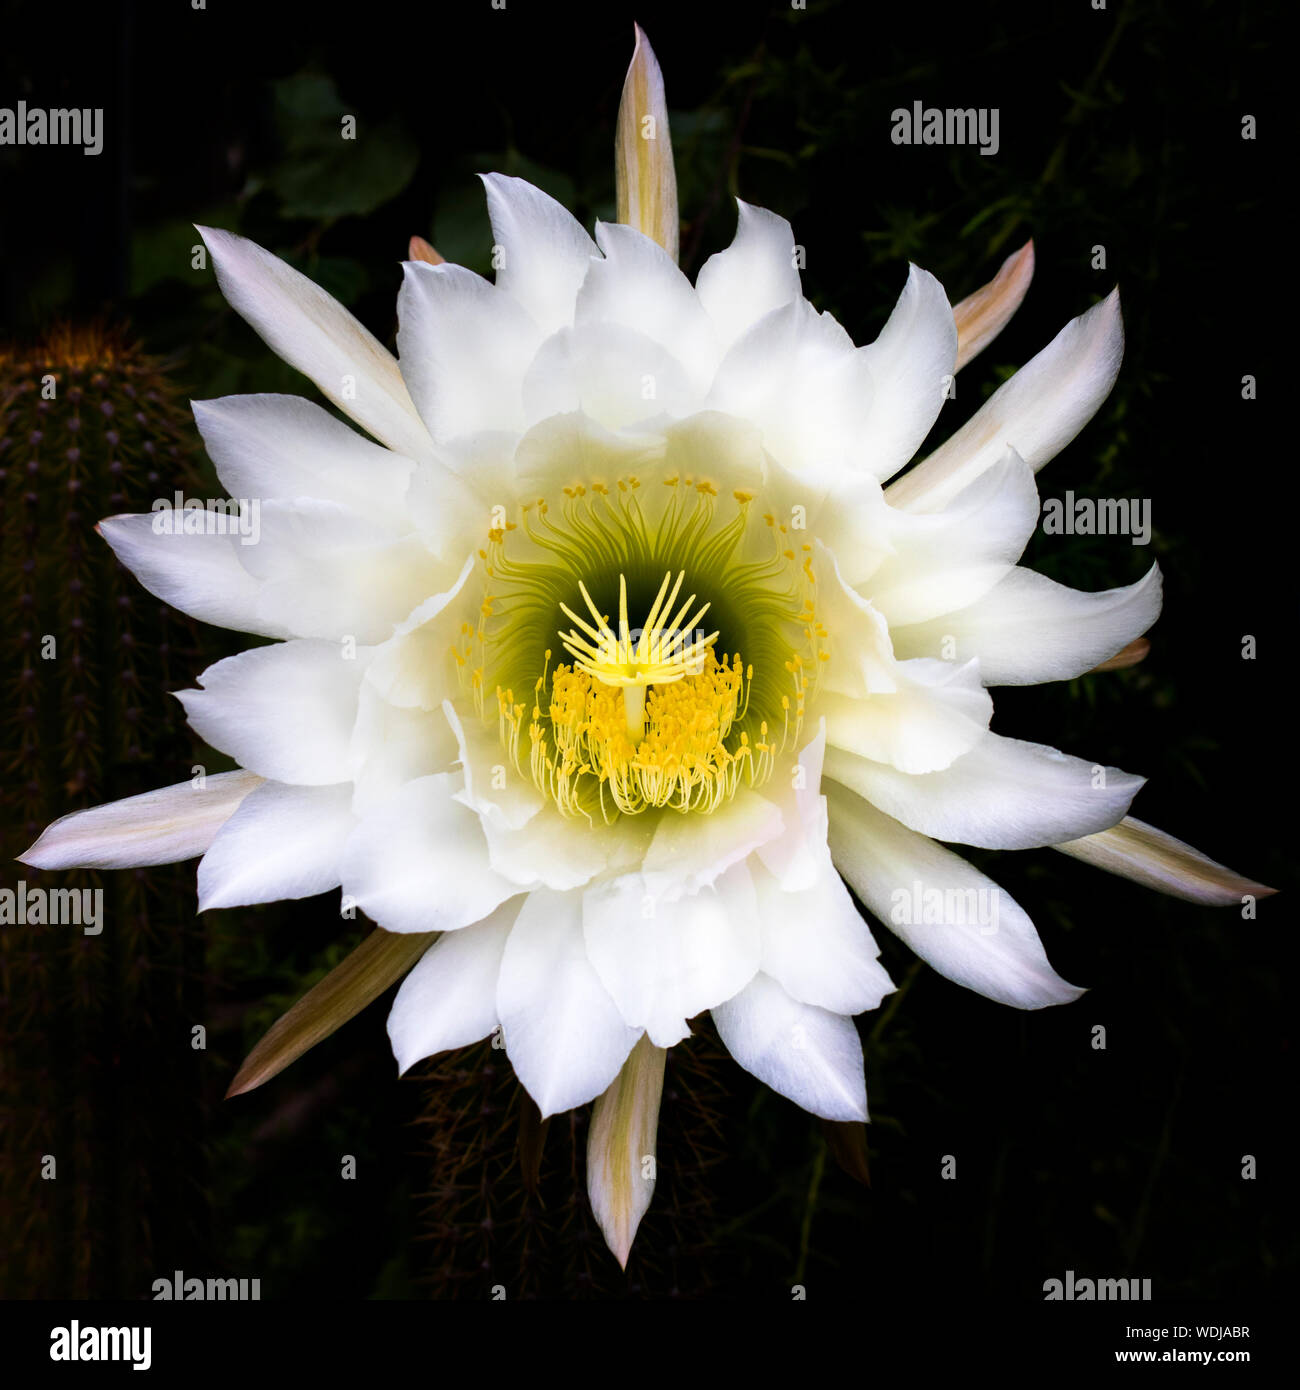 Extravagant detail in huge white and yellow blooming cactus flower. Stock Photo